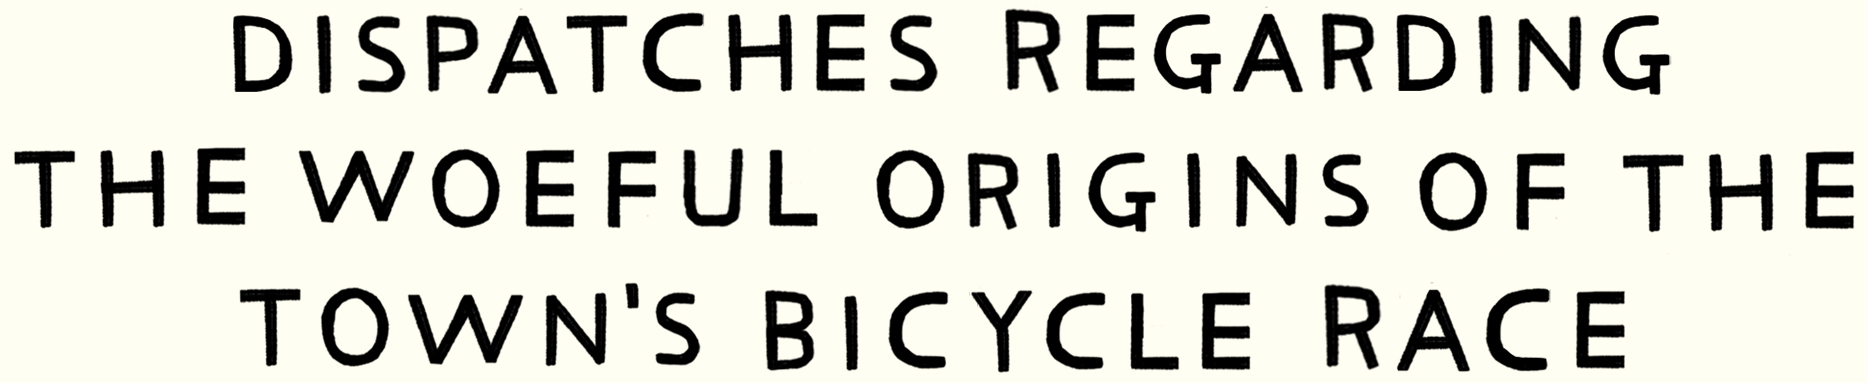 Dispatches Regarding the Woeful Origins of the Town's Bicycle Race